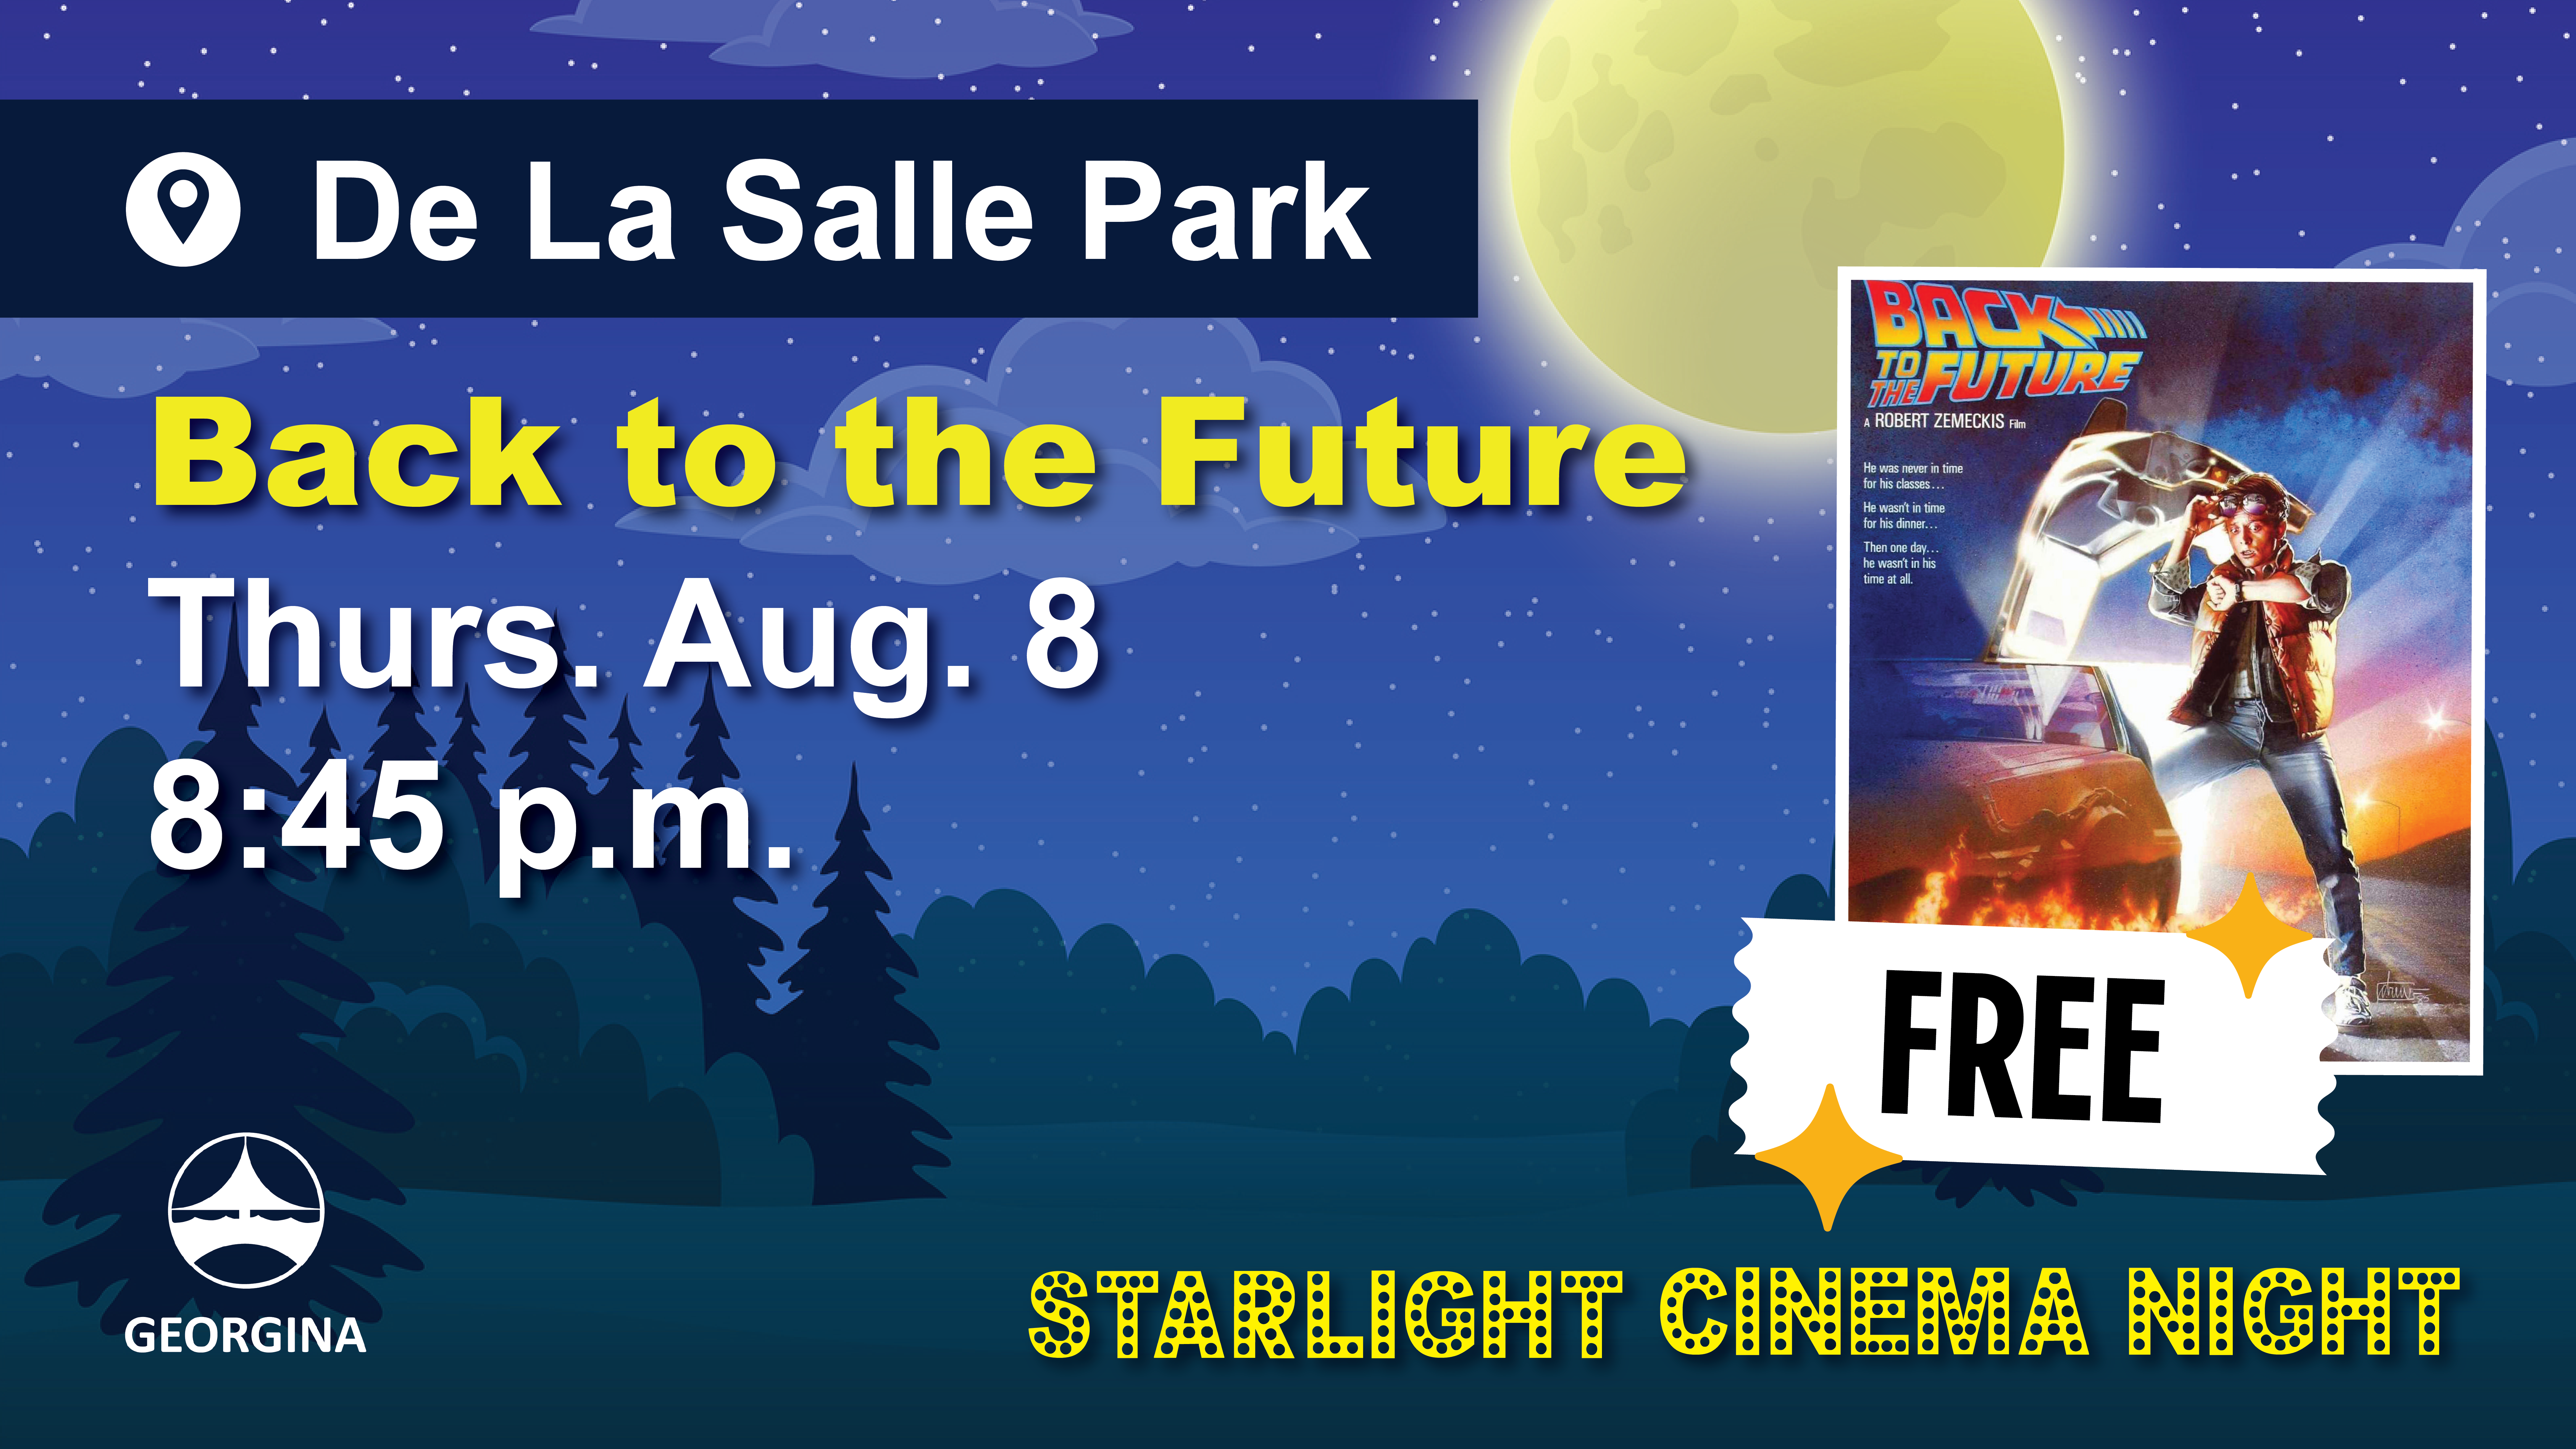 Poster for starlight Cinema Night De La Salle Park Back to the Future Thurs. Aug. 8 8:45 p.m. with poster of the movie and a ticket that says Free